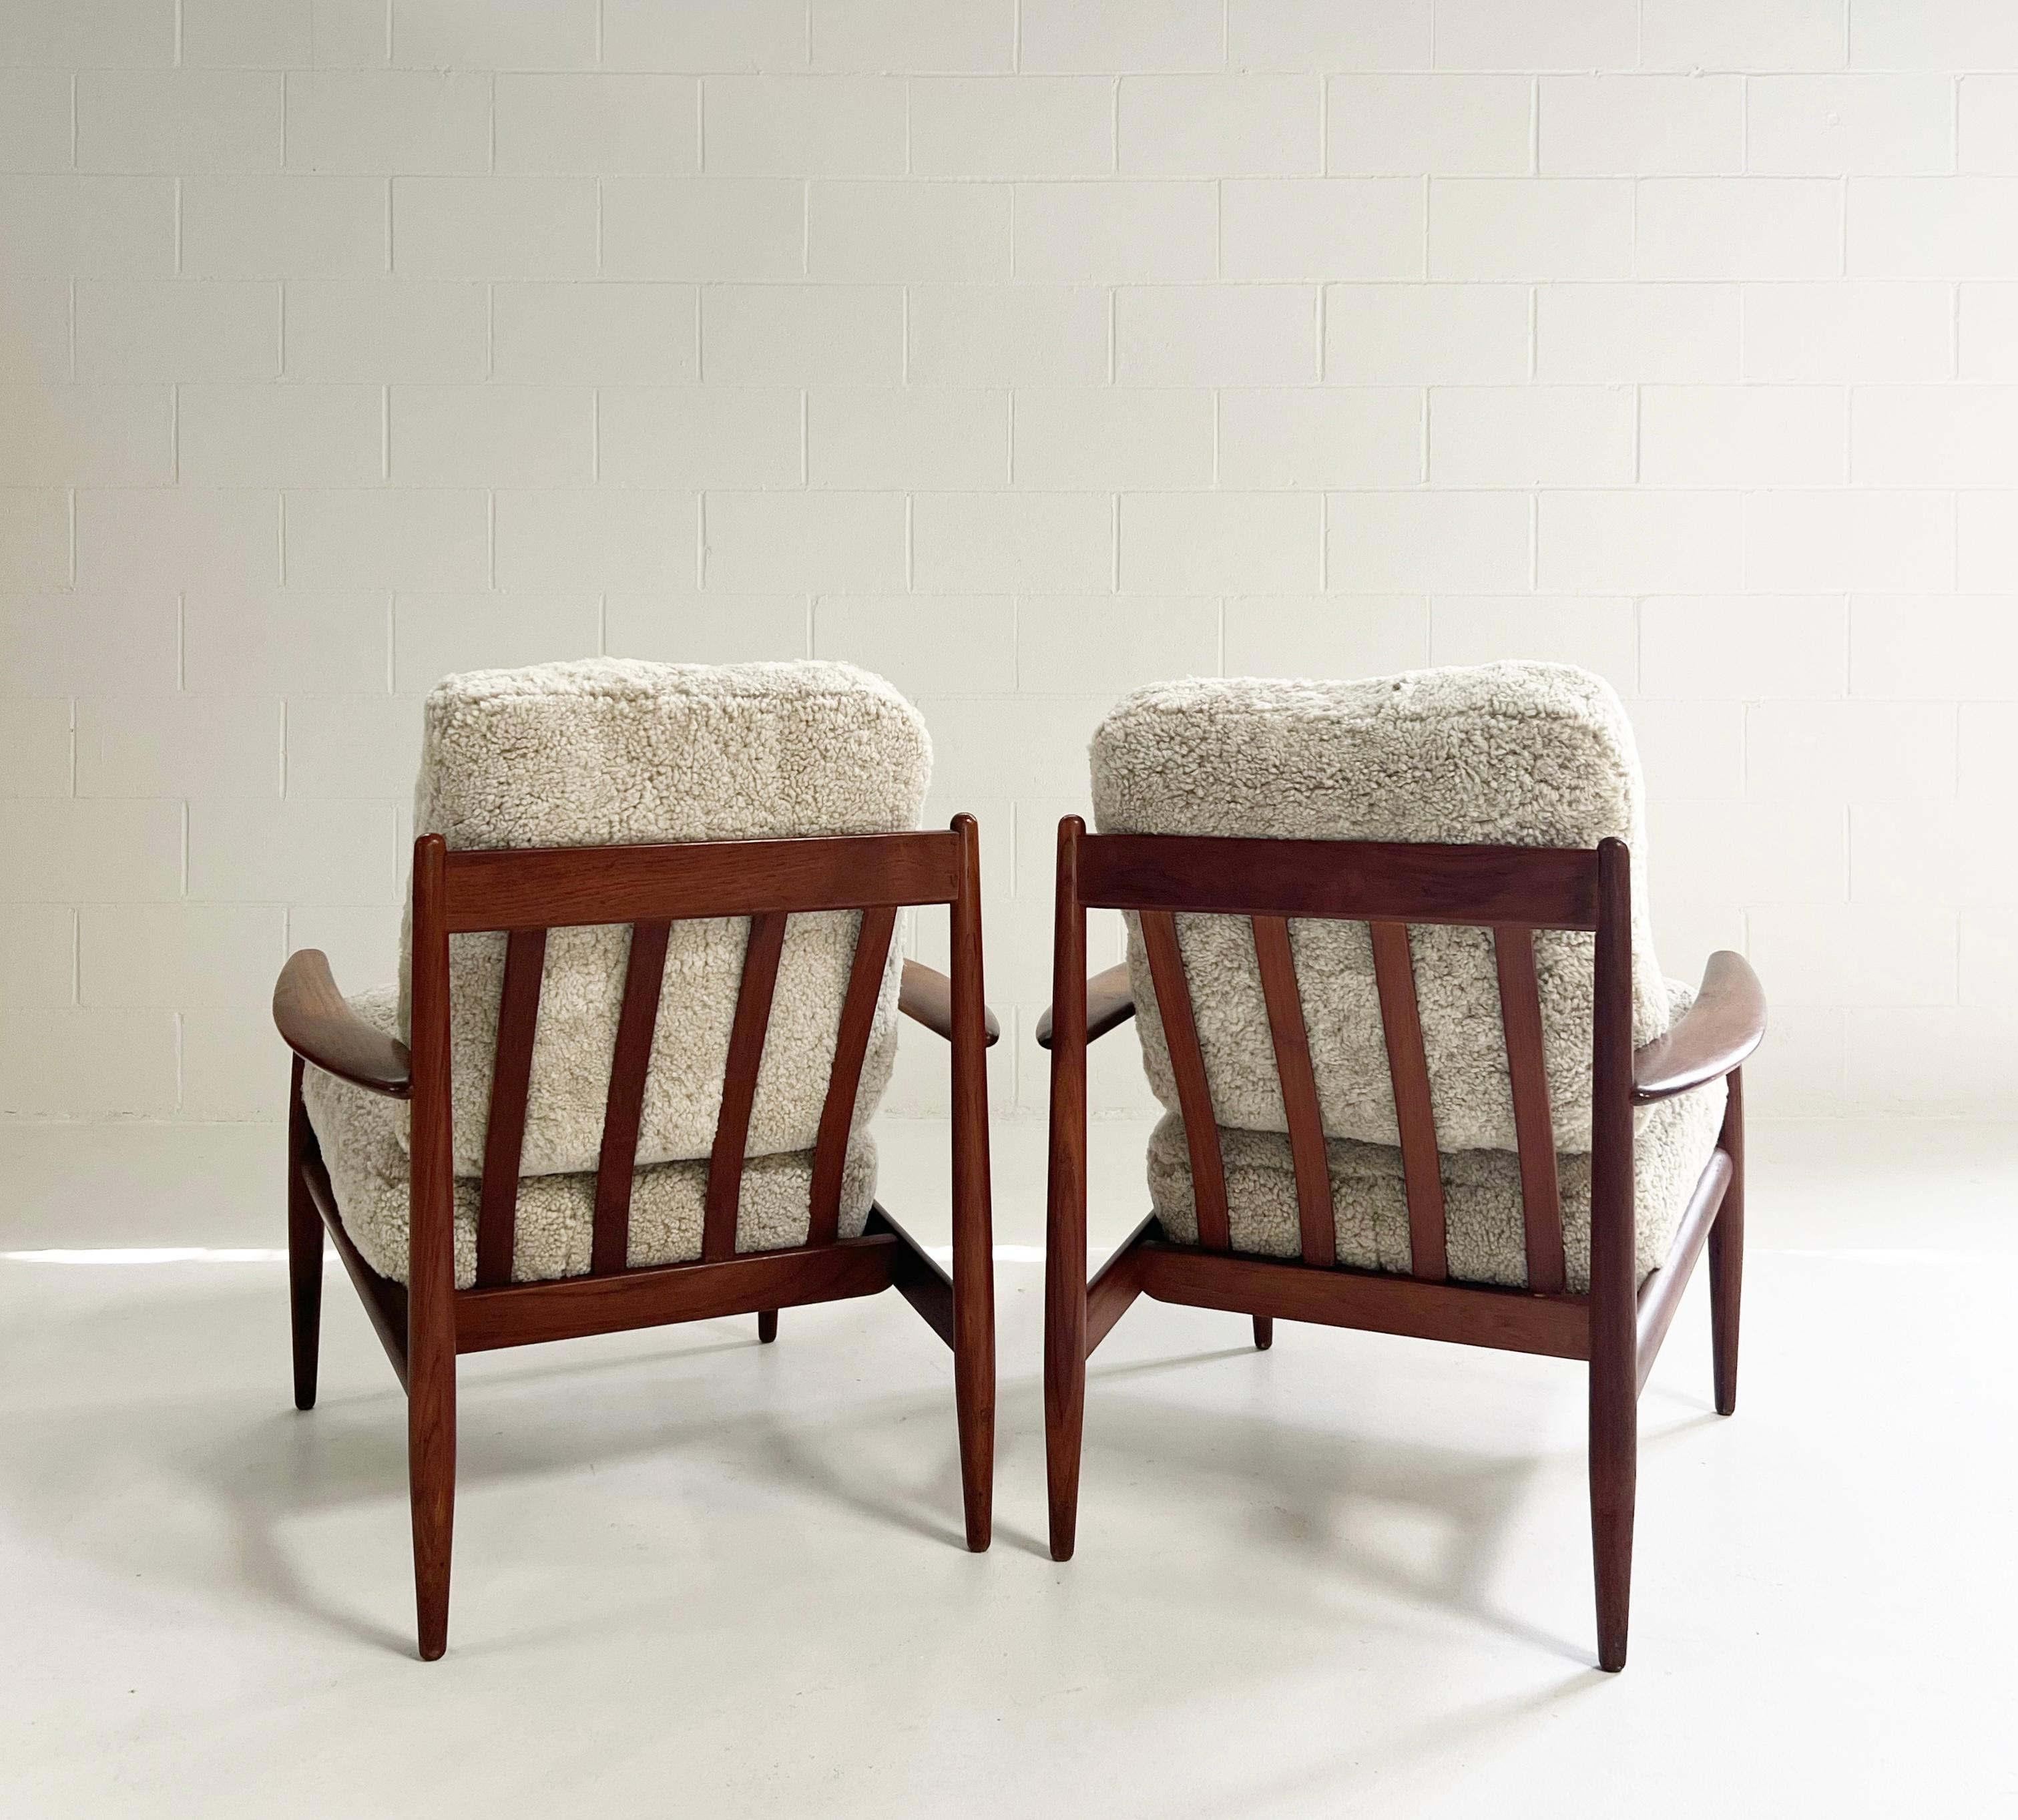 When women were rarely seen in the mid-century design world, Grete Jalk was a visionary. A leader in Danish modernism, her designs are simple with lines that are comfortable and clear. We love these Model 118 teak lounge chairs. For the cushions,